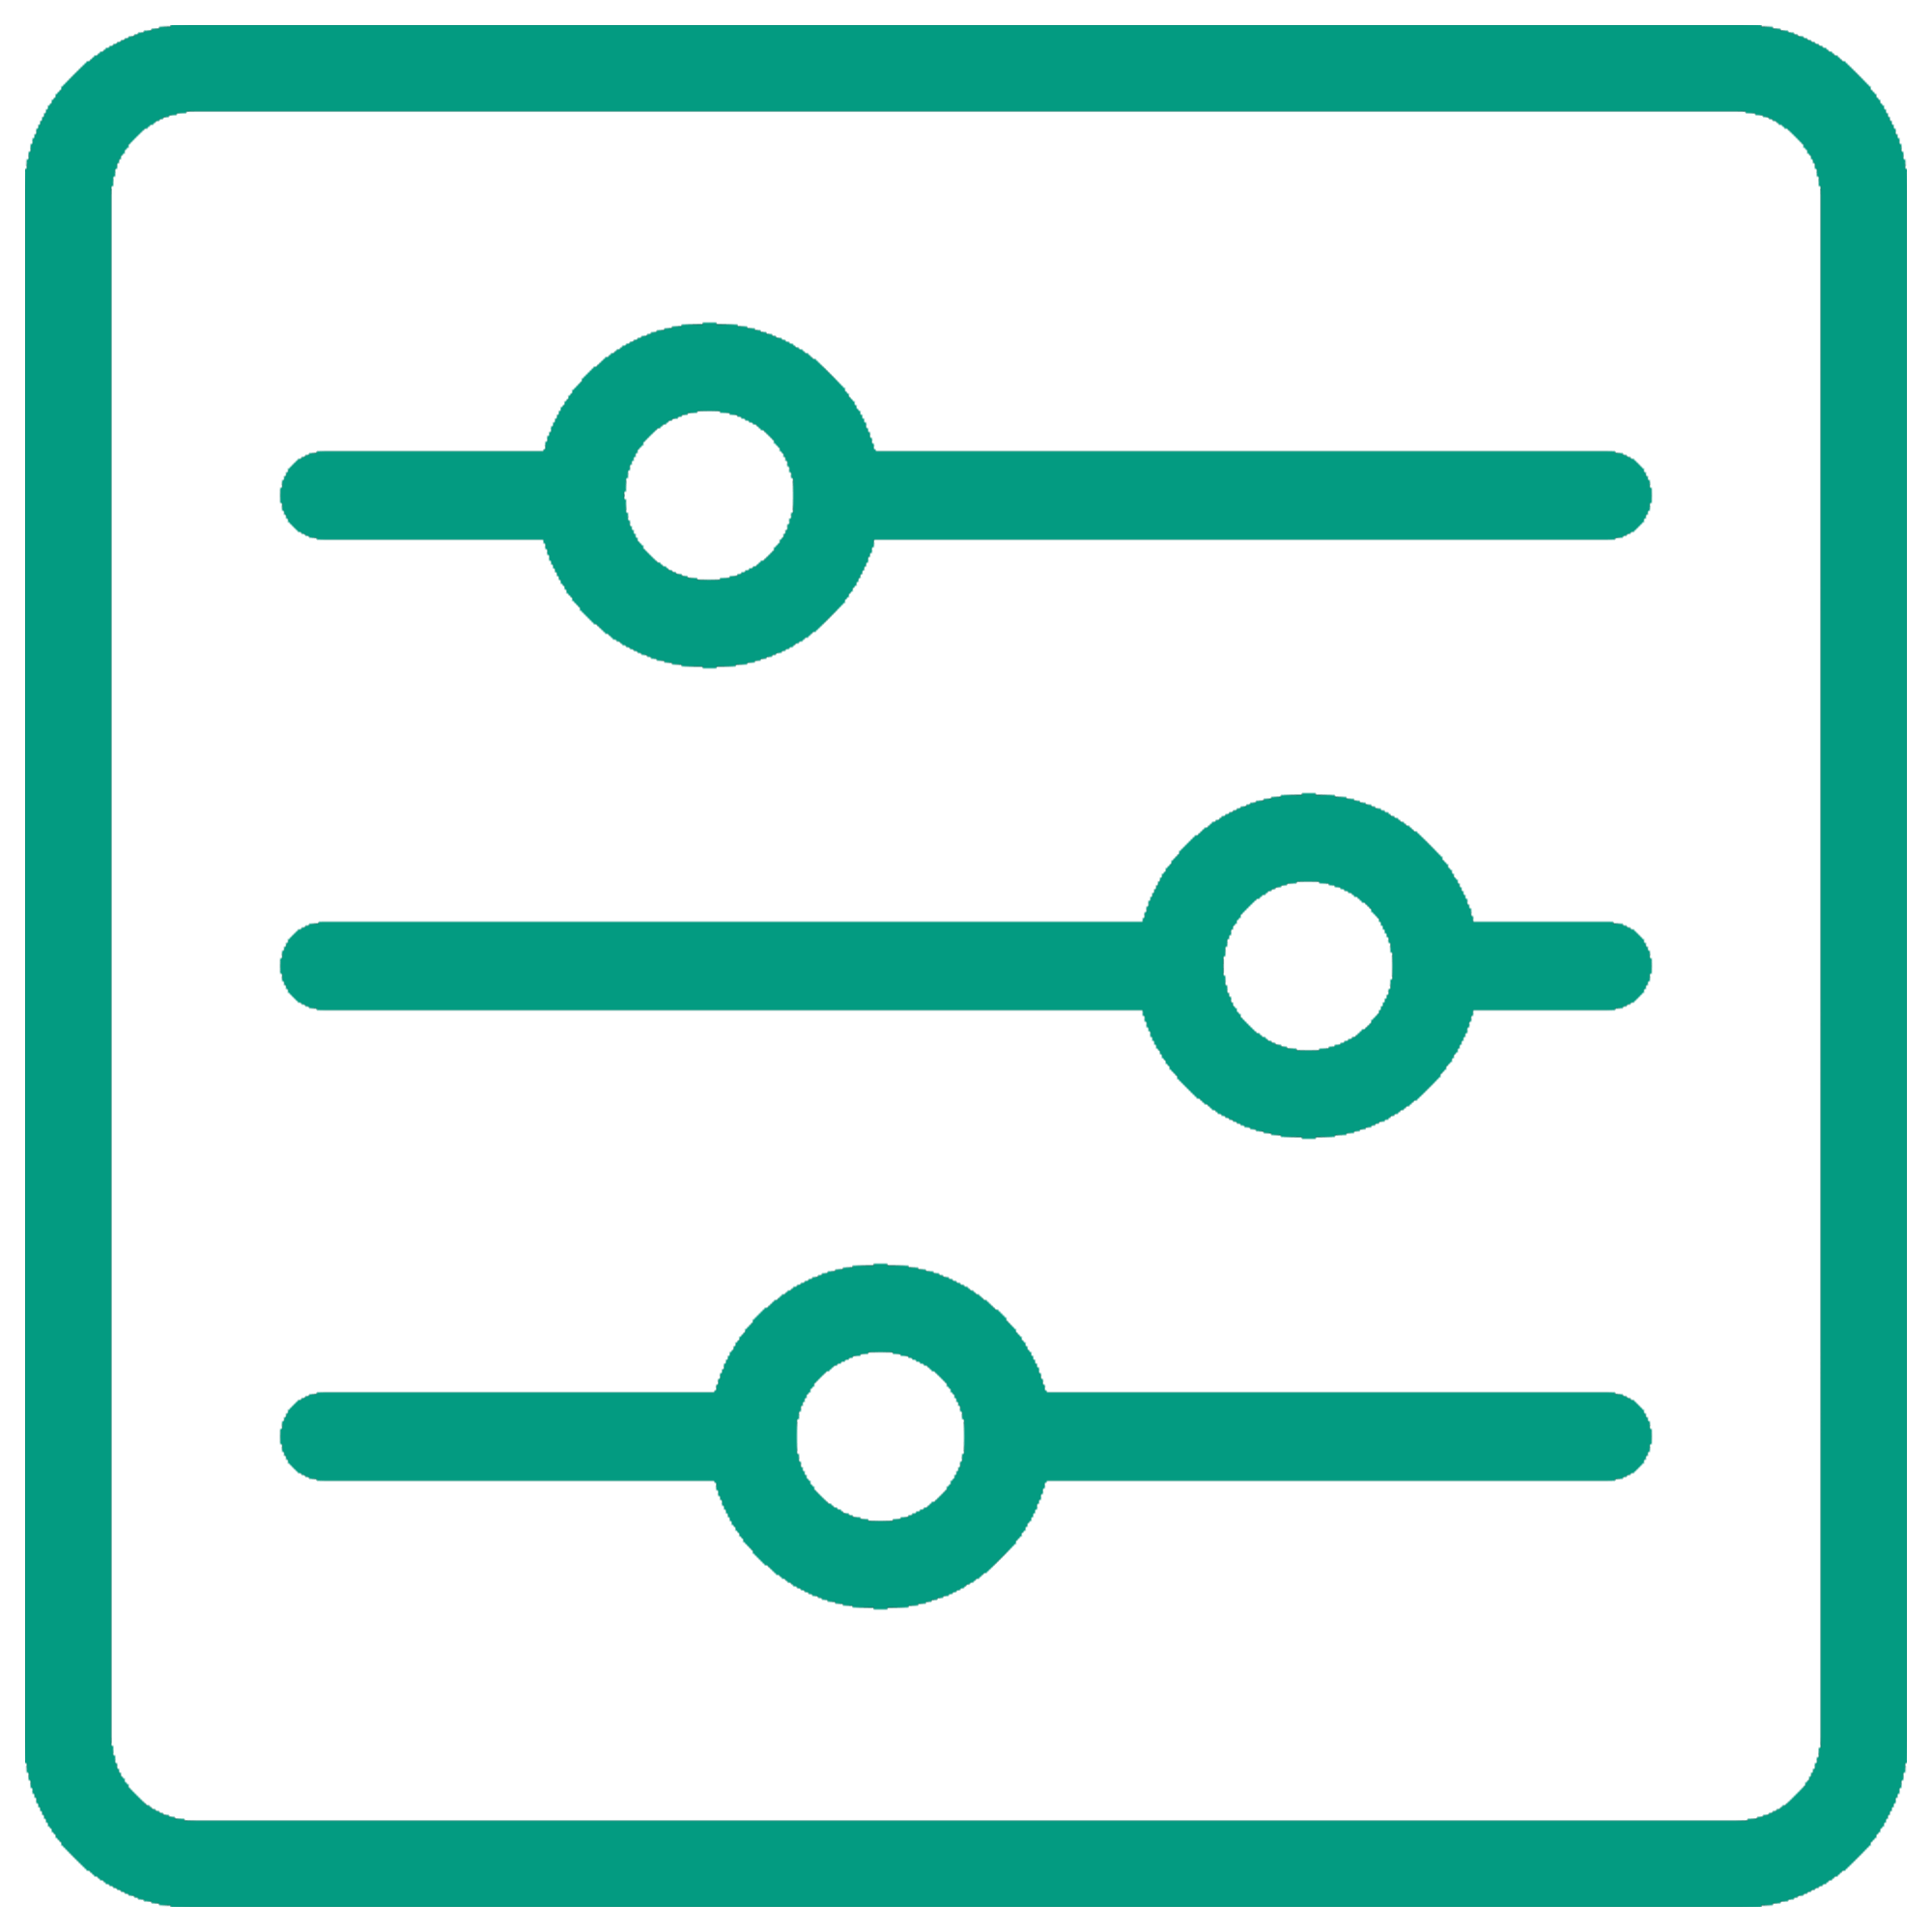 A green square featuring four circles, representing the technical expertise of an AWS data engineer.